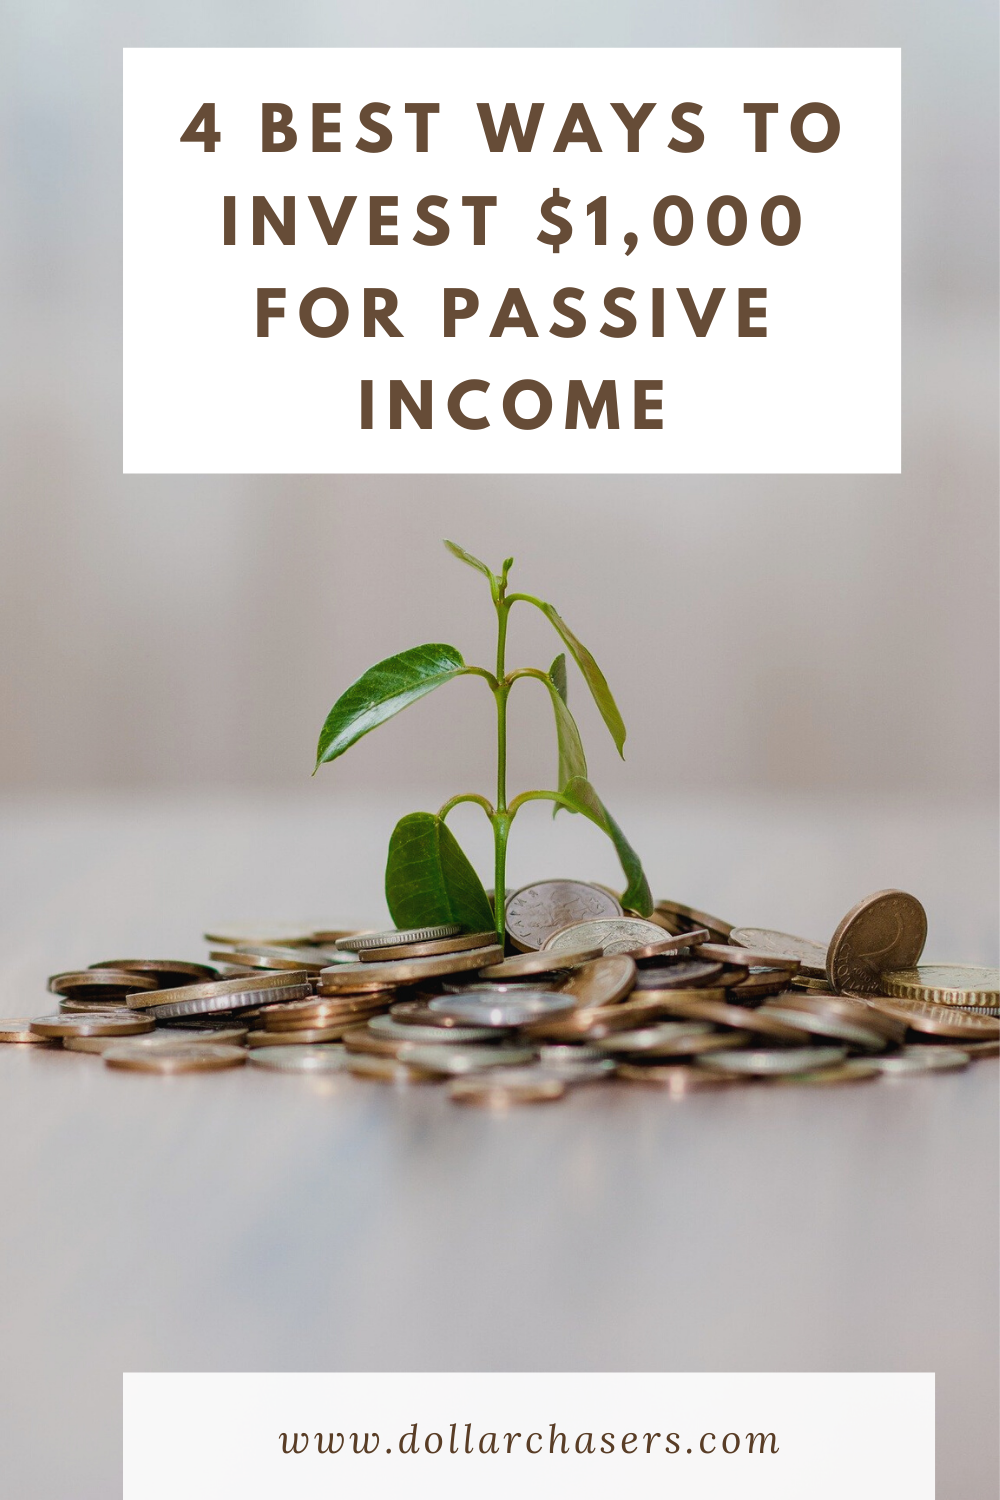 4 Best Ways to Invest $1,000 for Passive Income